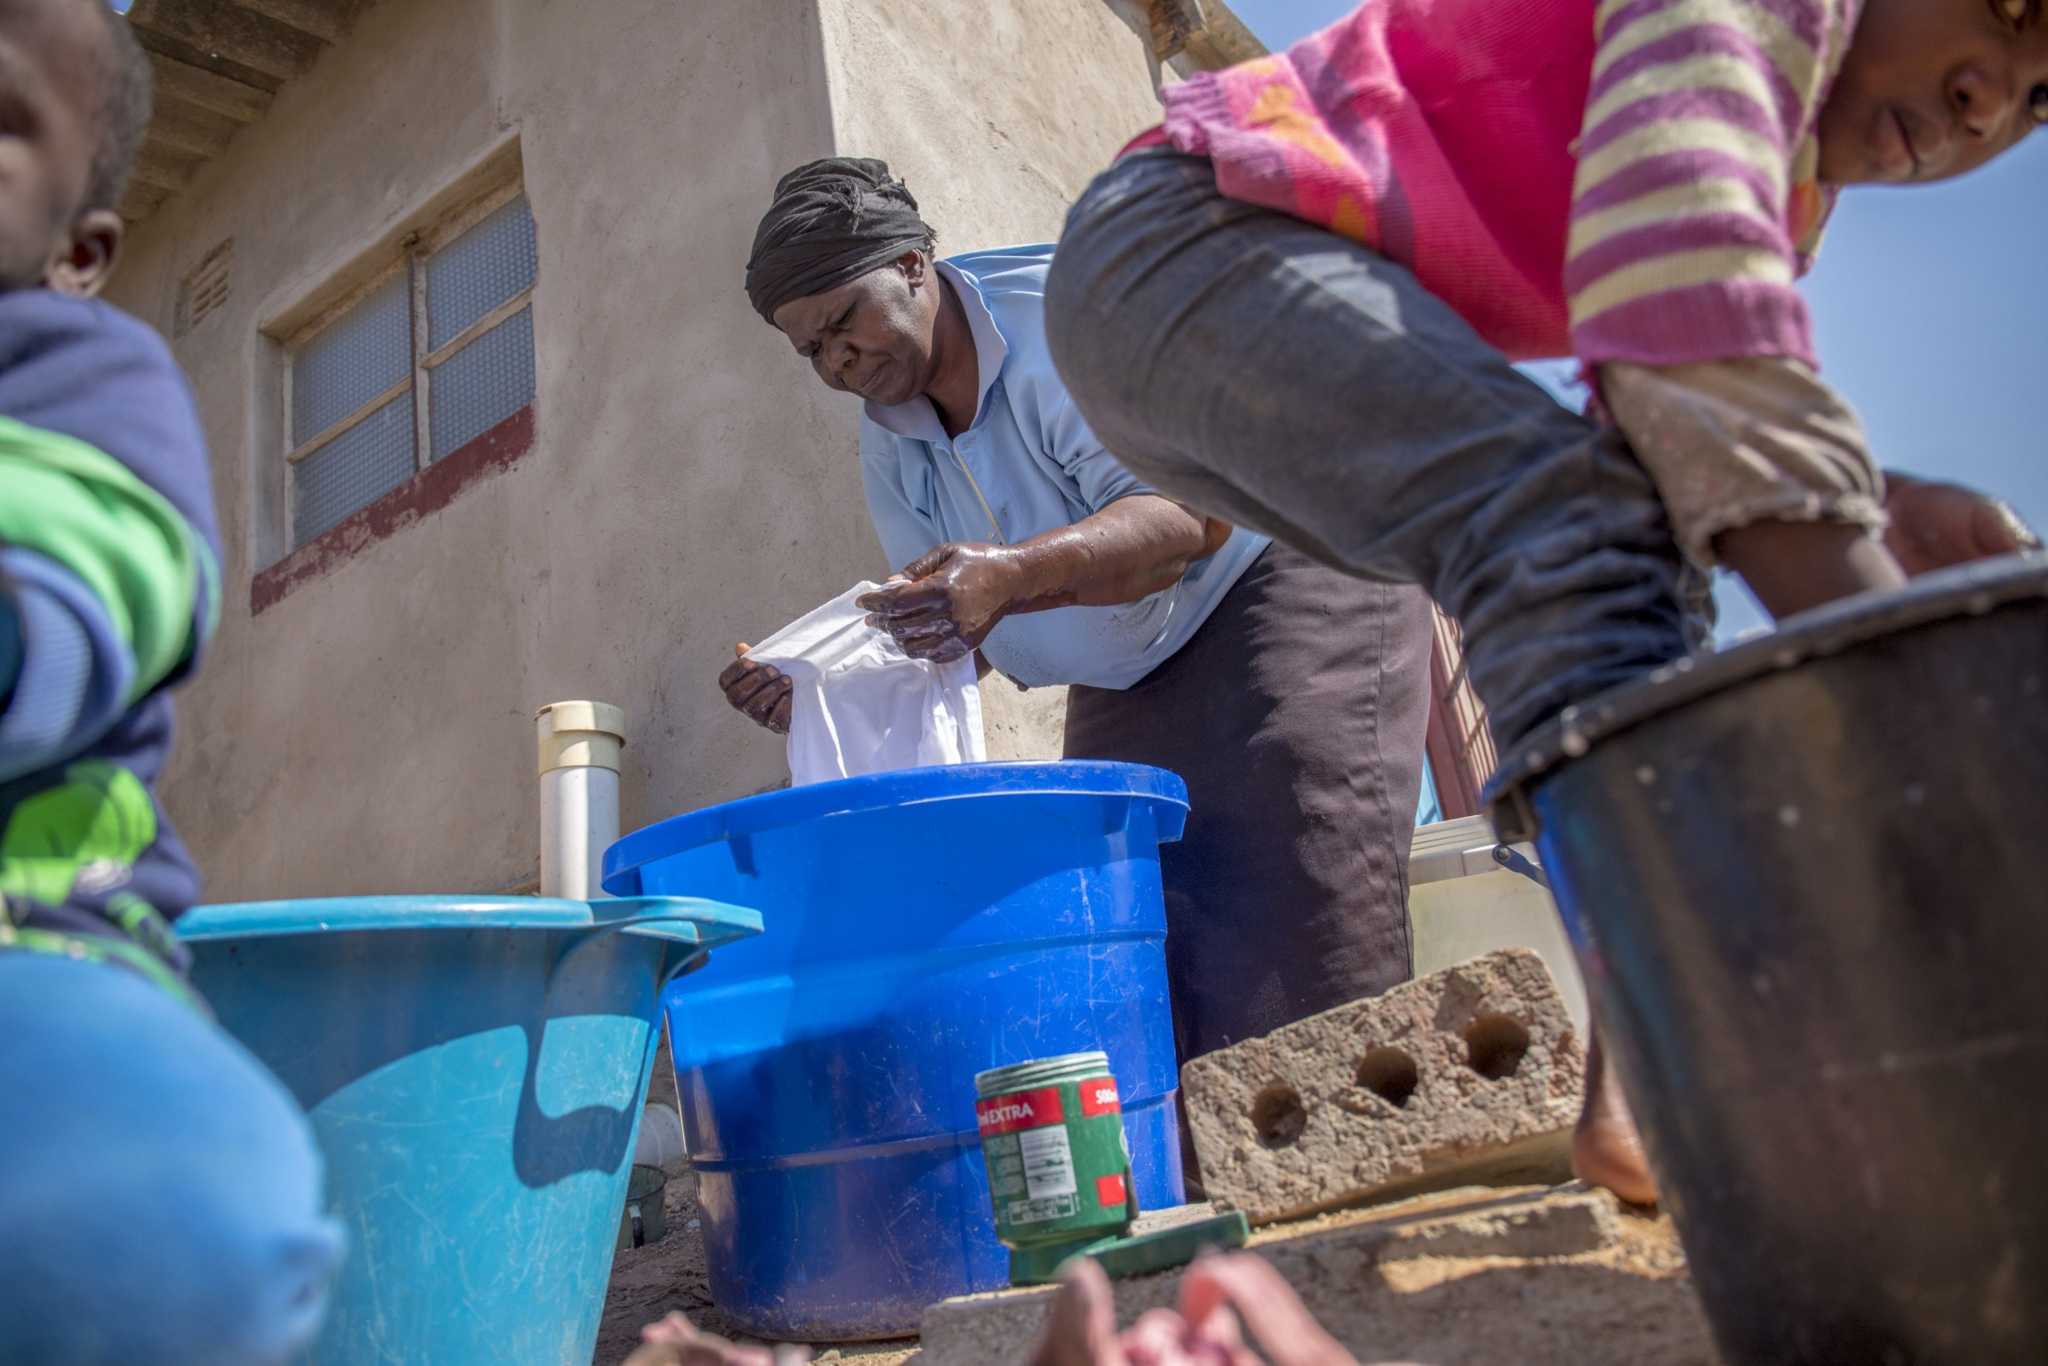 A water crisis is making things even worse in Zimbabwe - Torrington Register Citizen